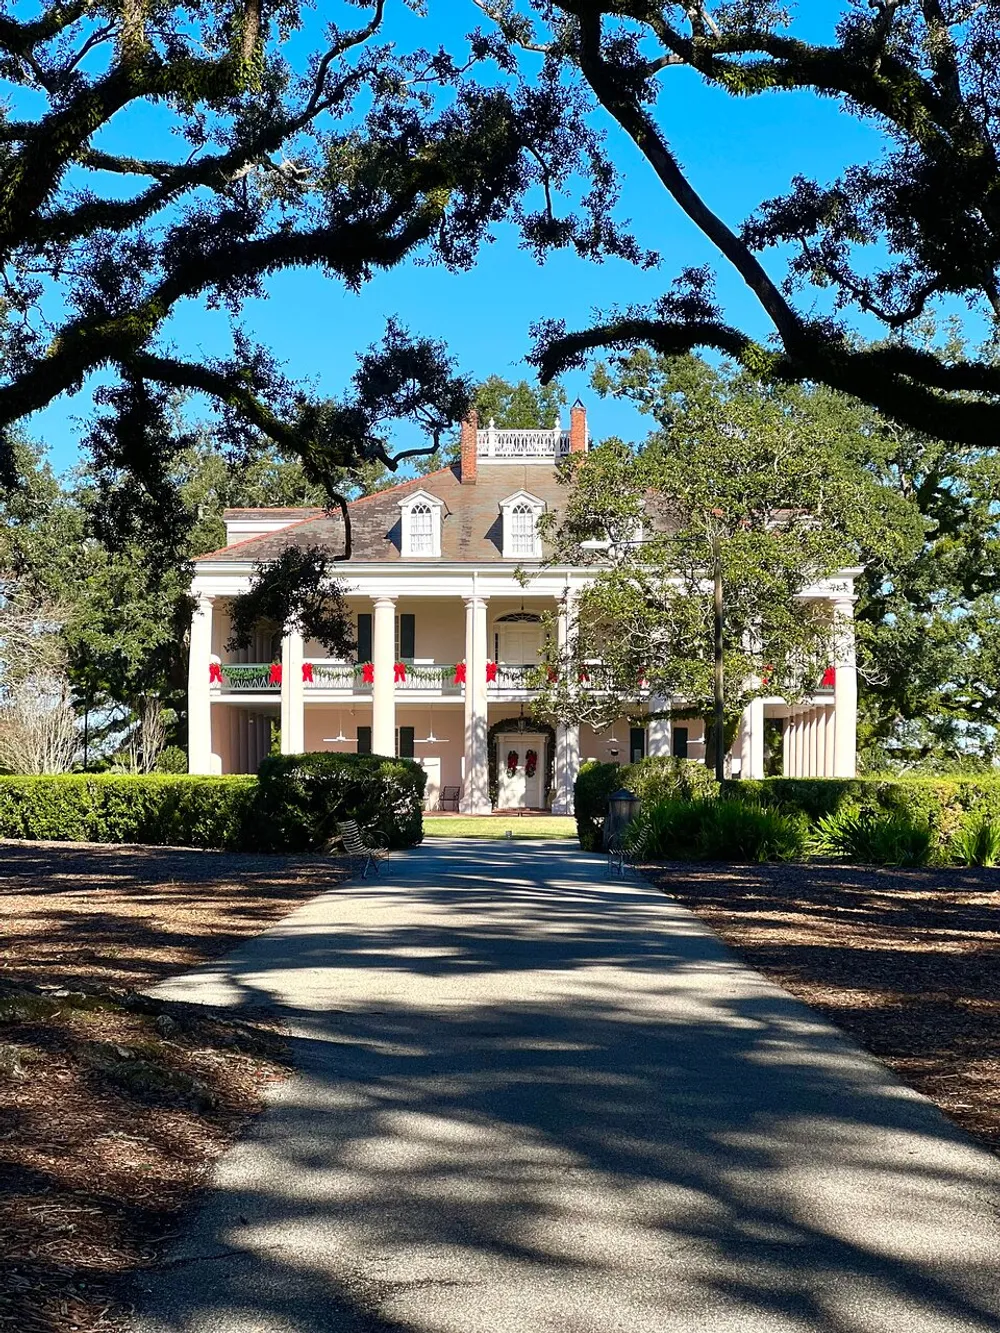 A grand white house with red ribbon decorations on its columns is framed by the sprawling branches of an oak tree with a shaded driveway leading to its entrance